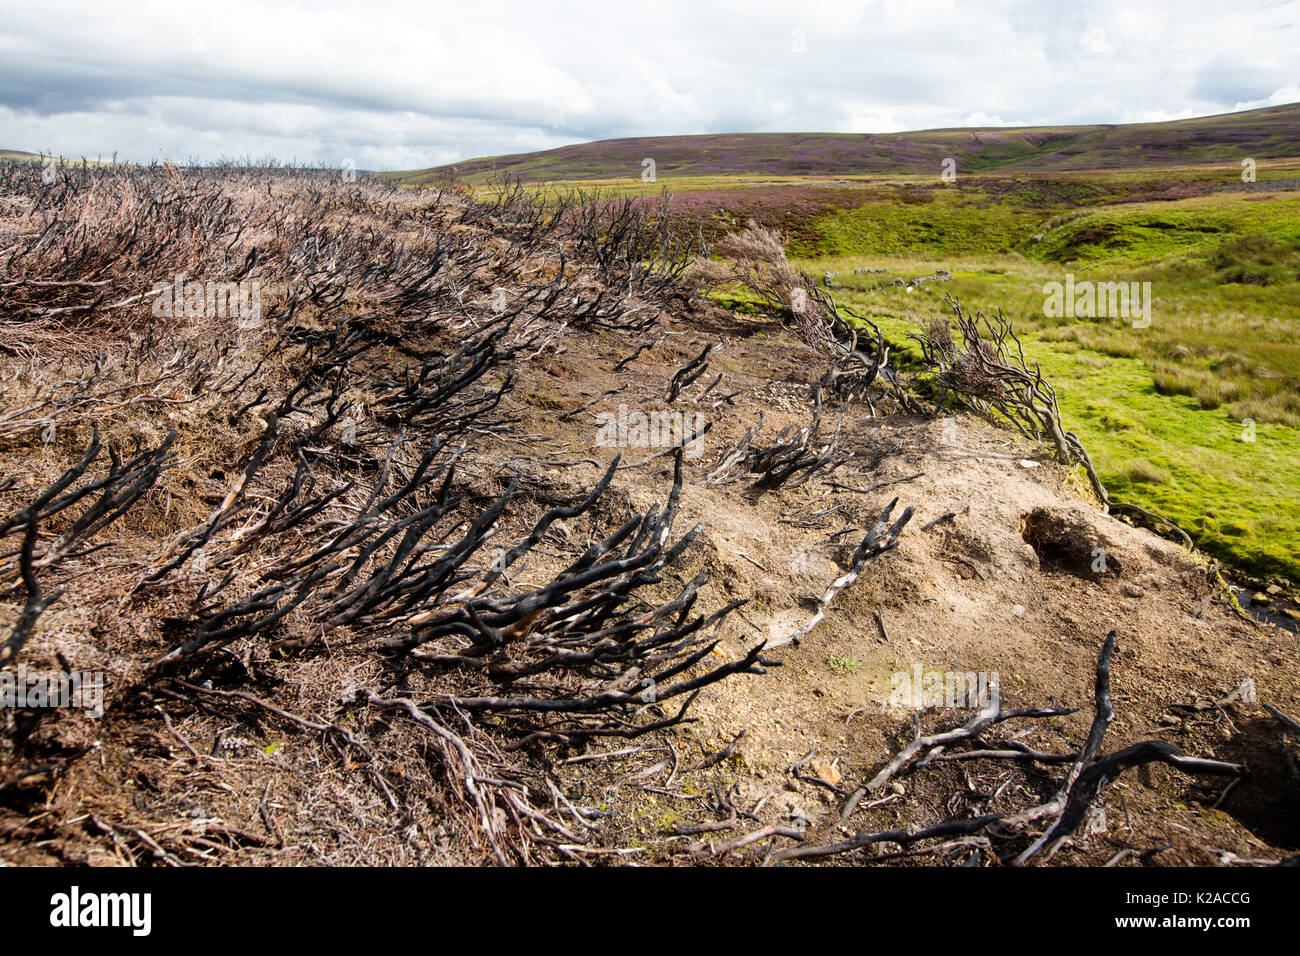 Heather burning to improve the moorland for grouse shooting, but in every other respect an environmentally damaging practice, Arkengarthdale, Yorkshir Stock Photo